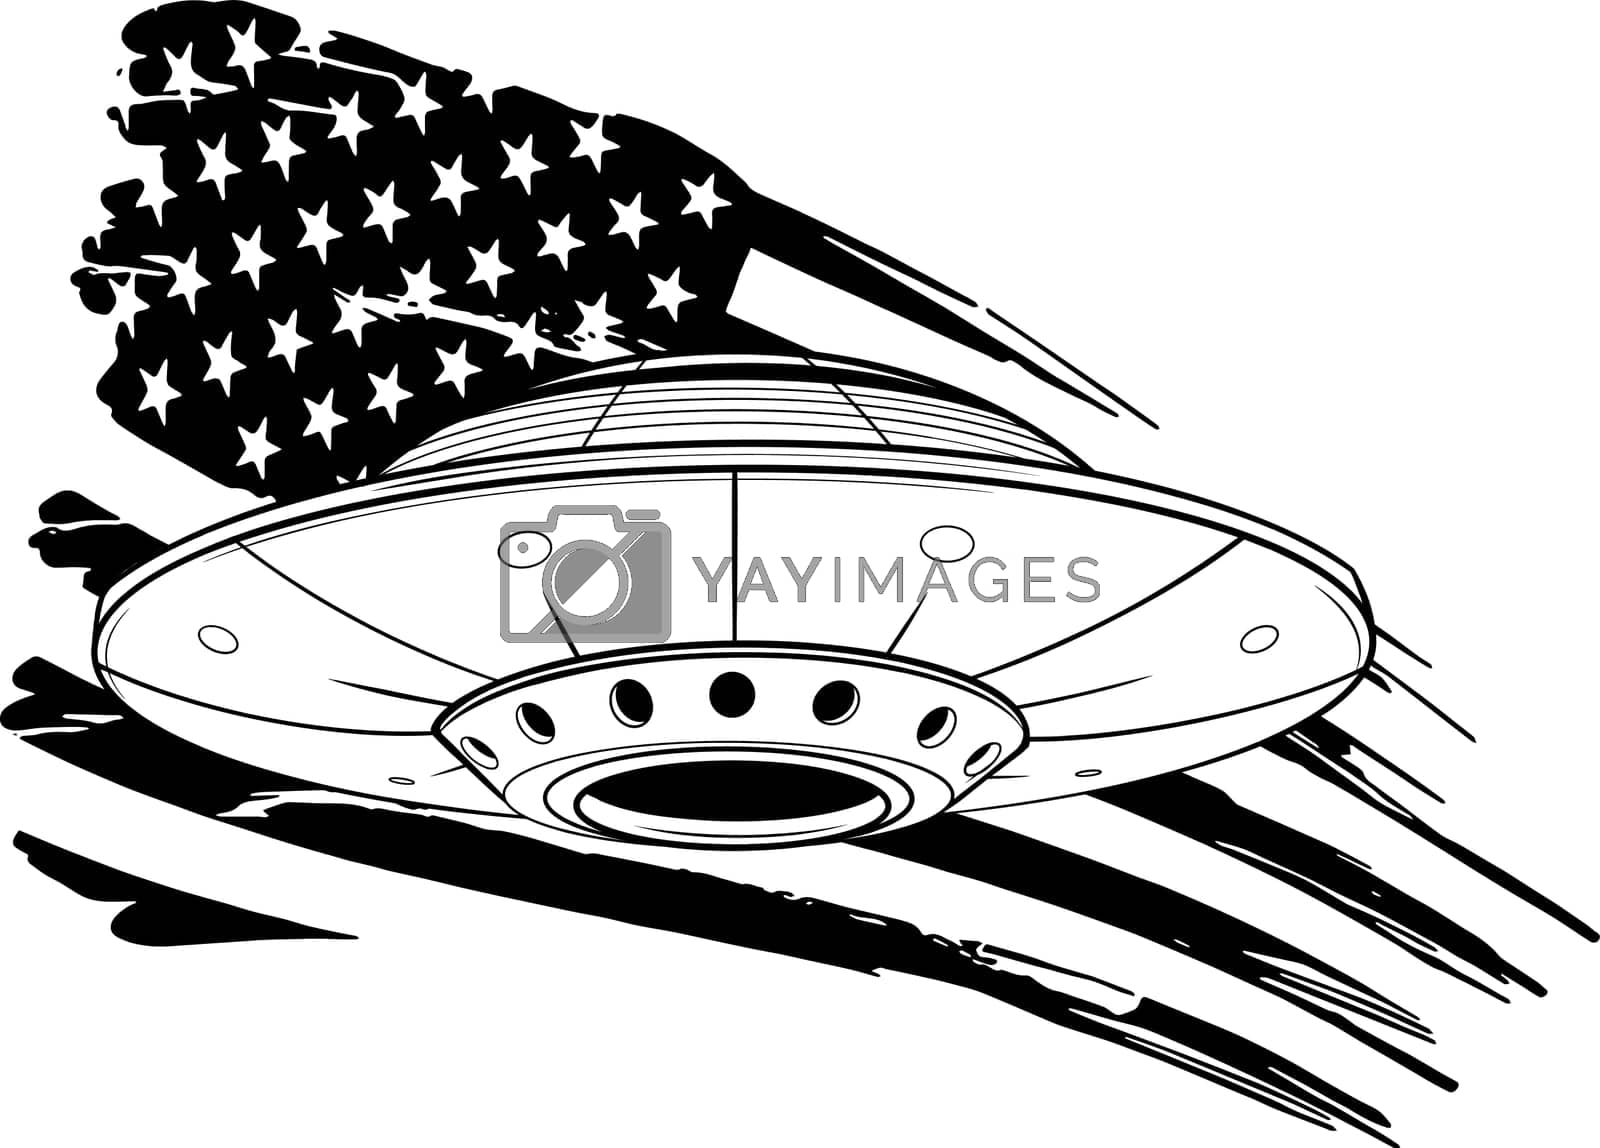 Royalty free image of vector illustration of monochrome ufo with american flag by dean